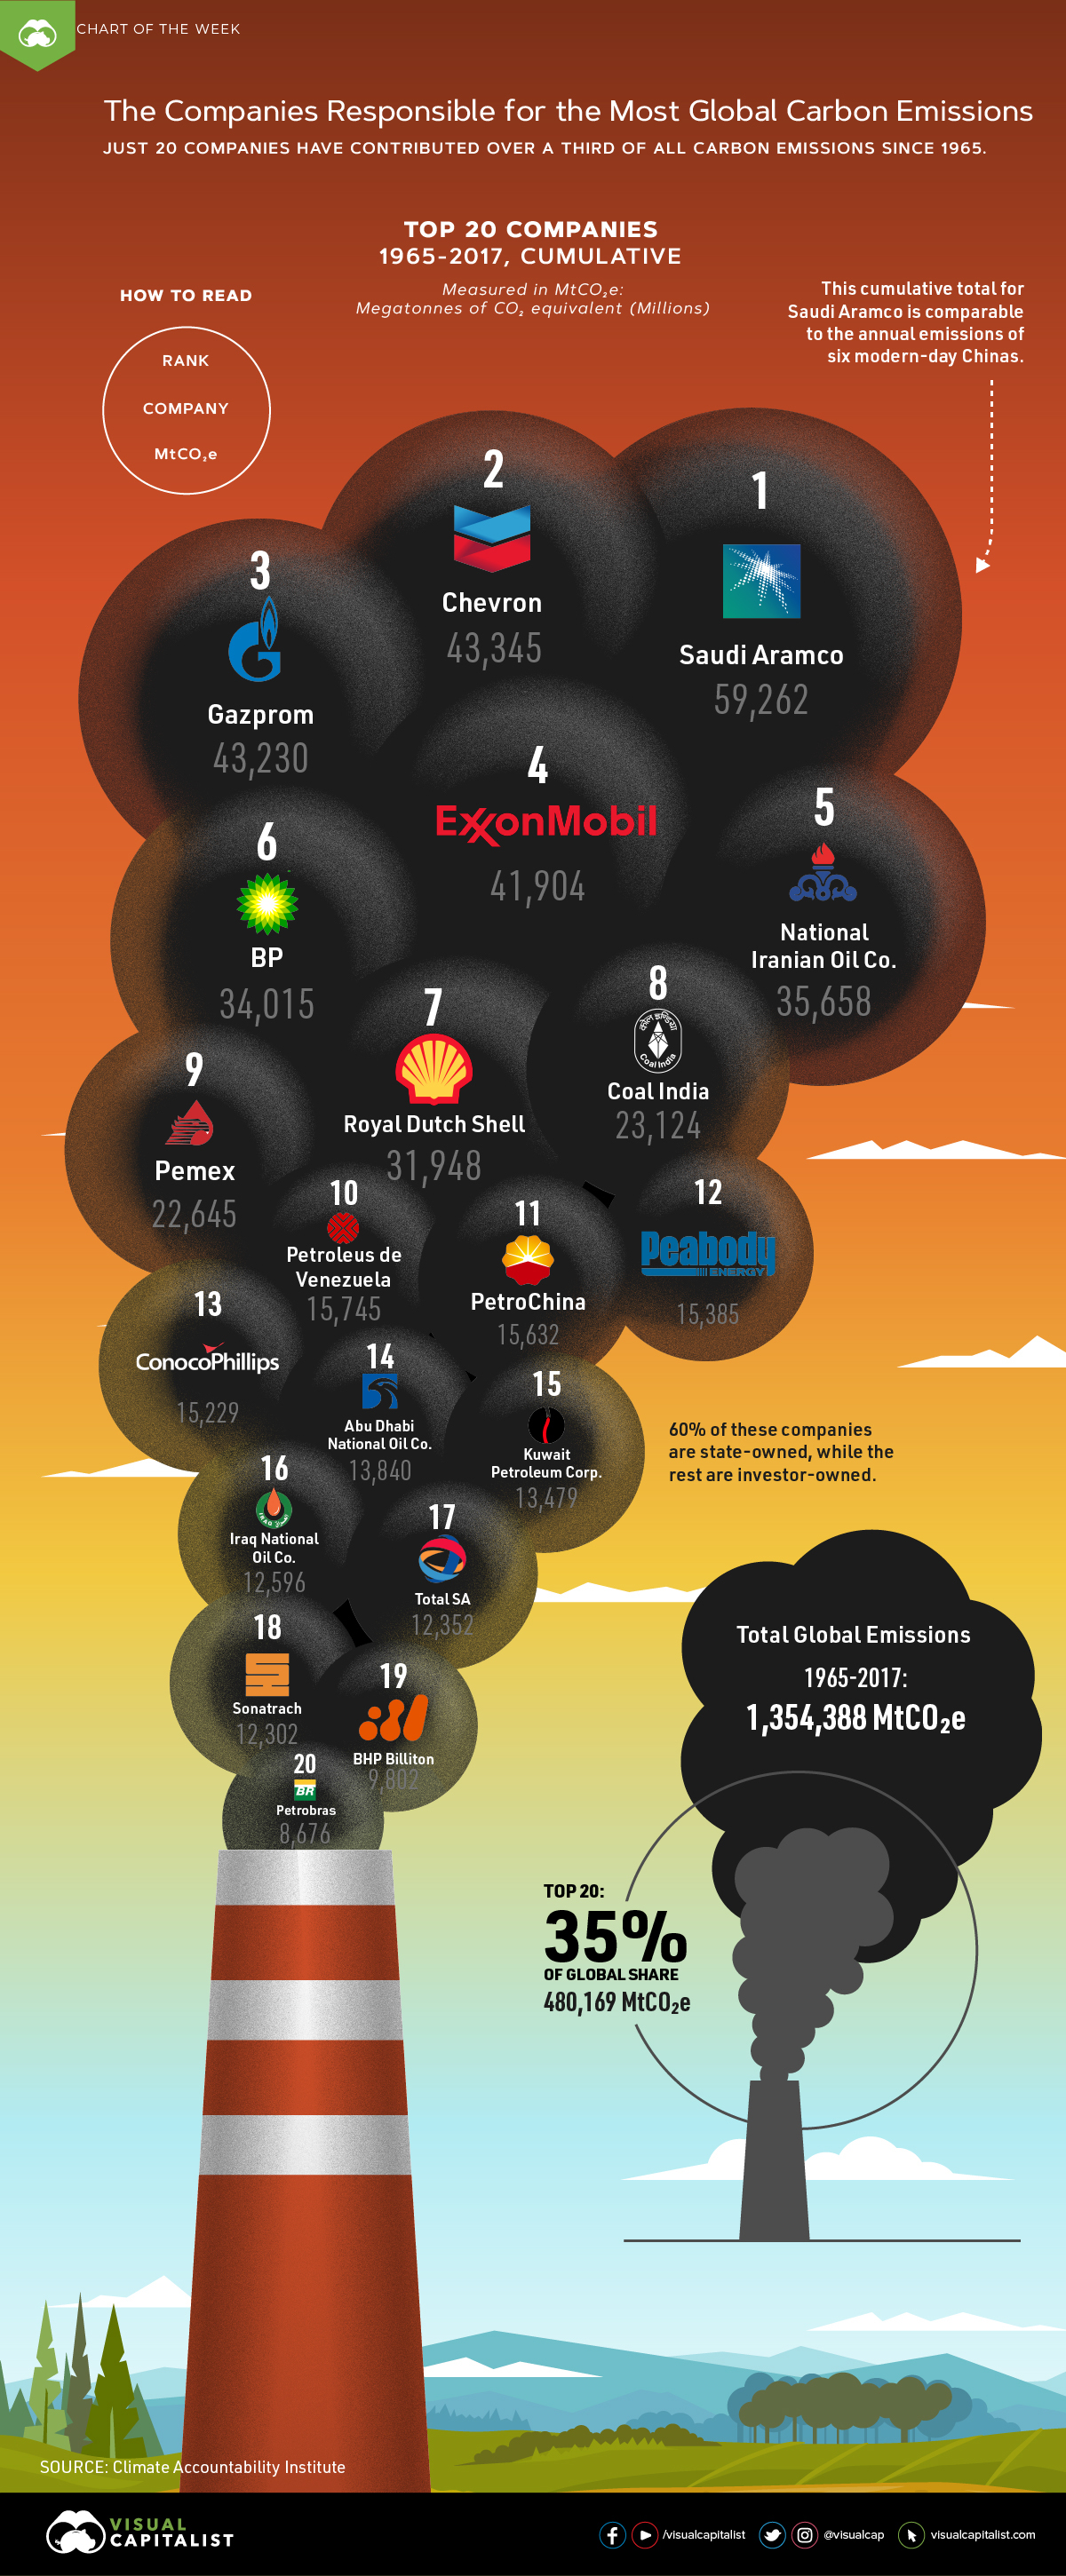 Which Companies Are Responsible For the Most Carbon Emissions?